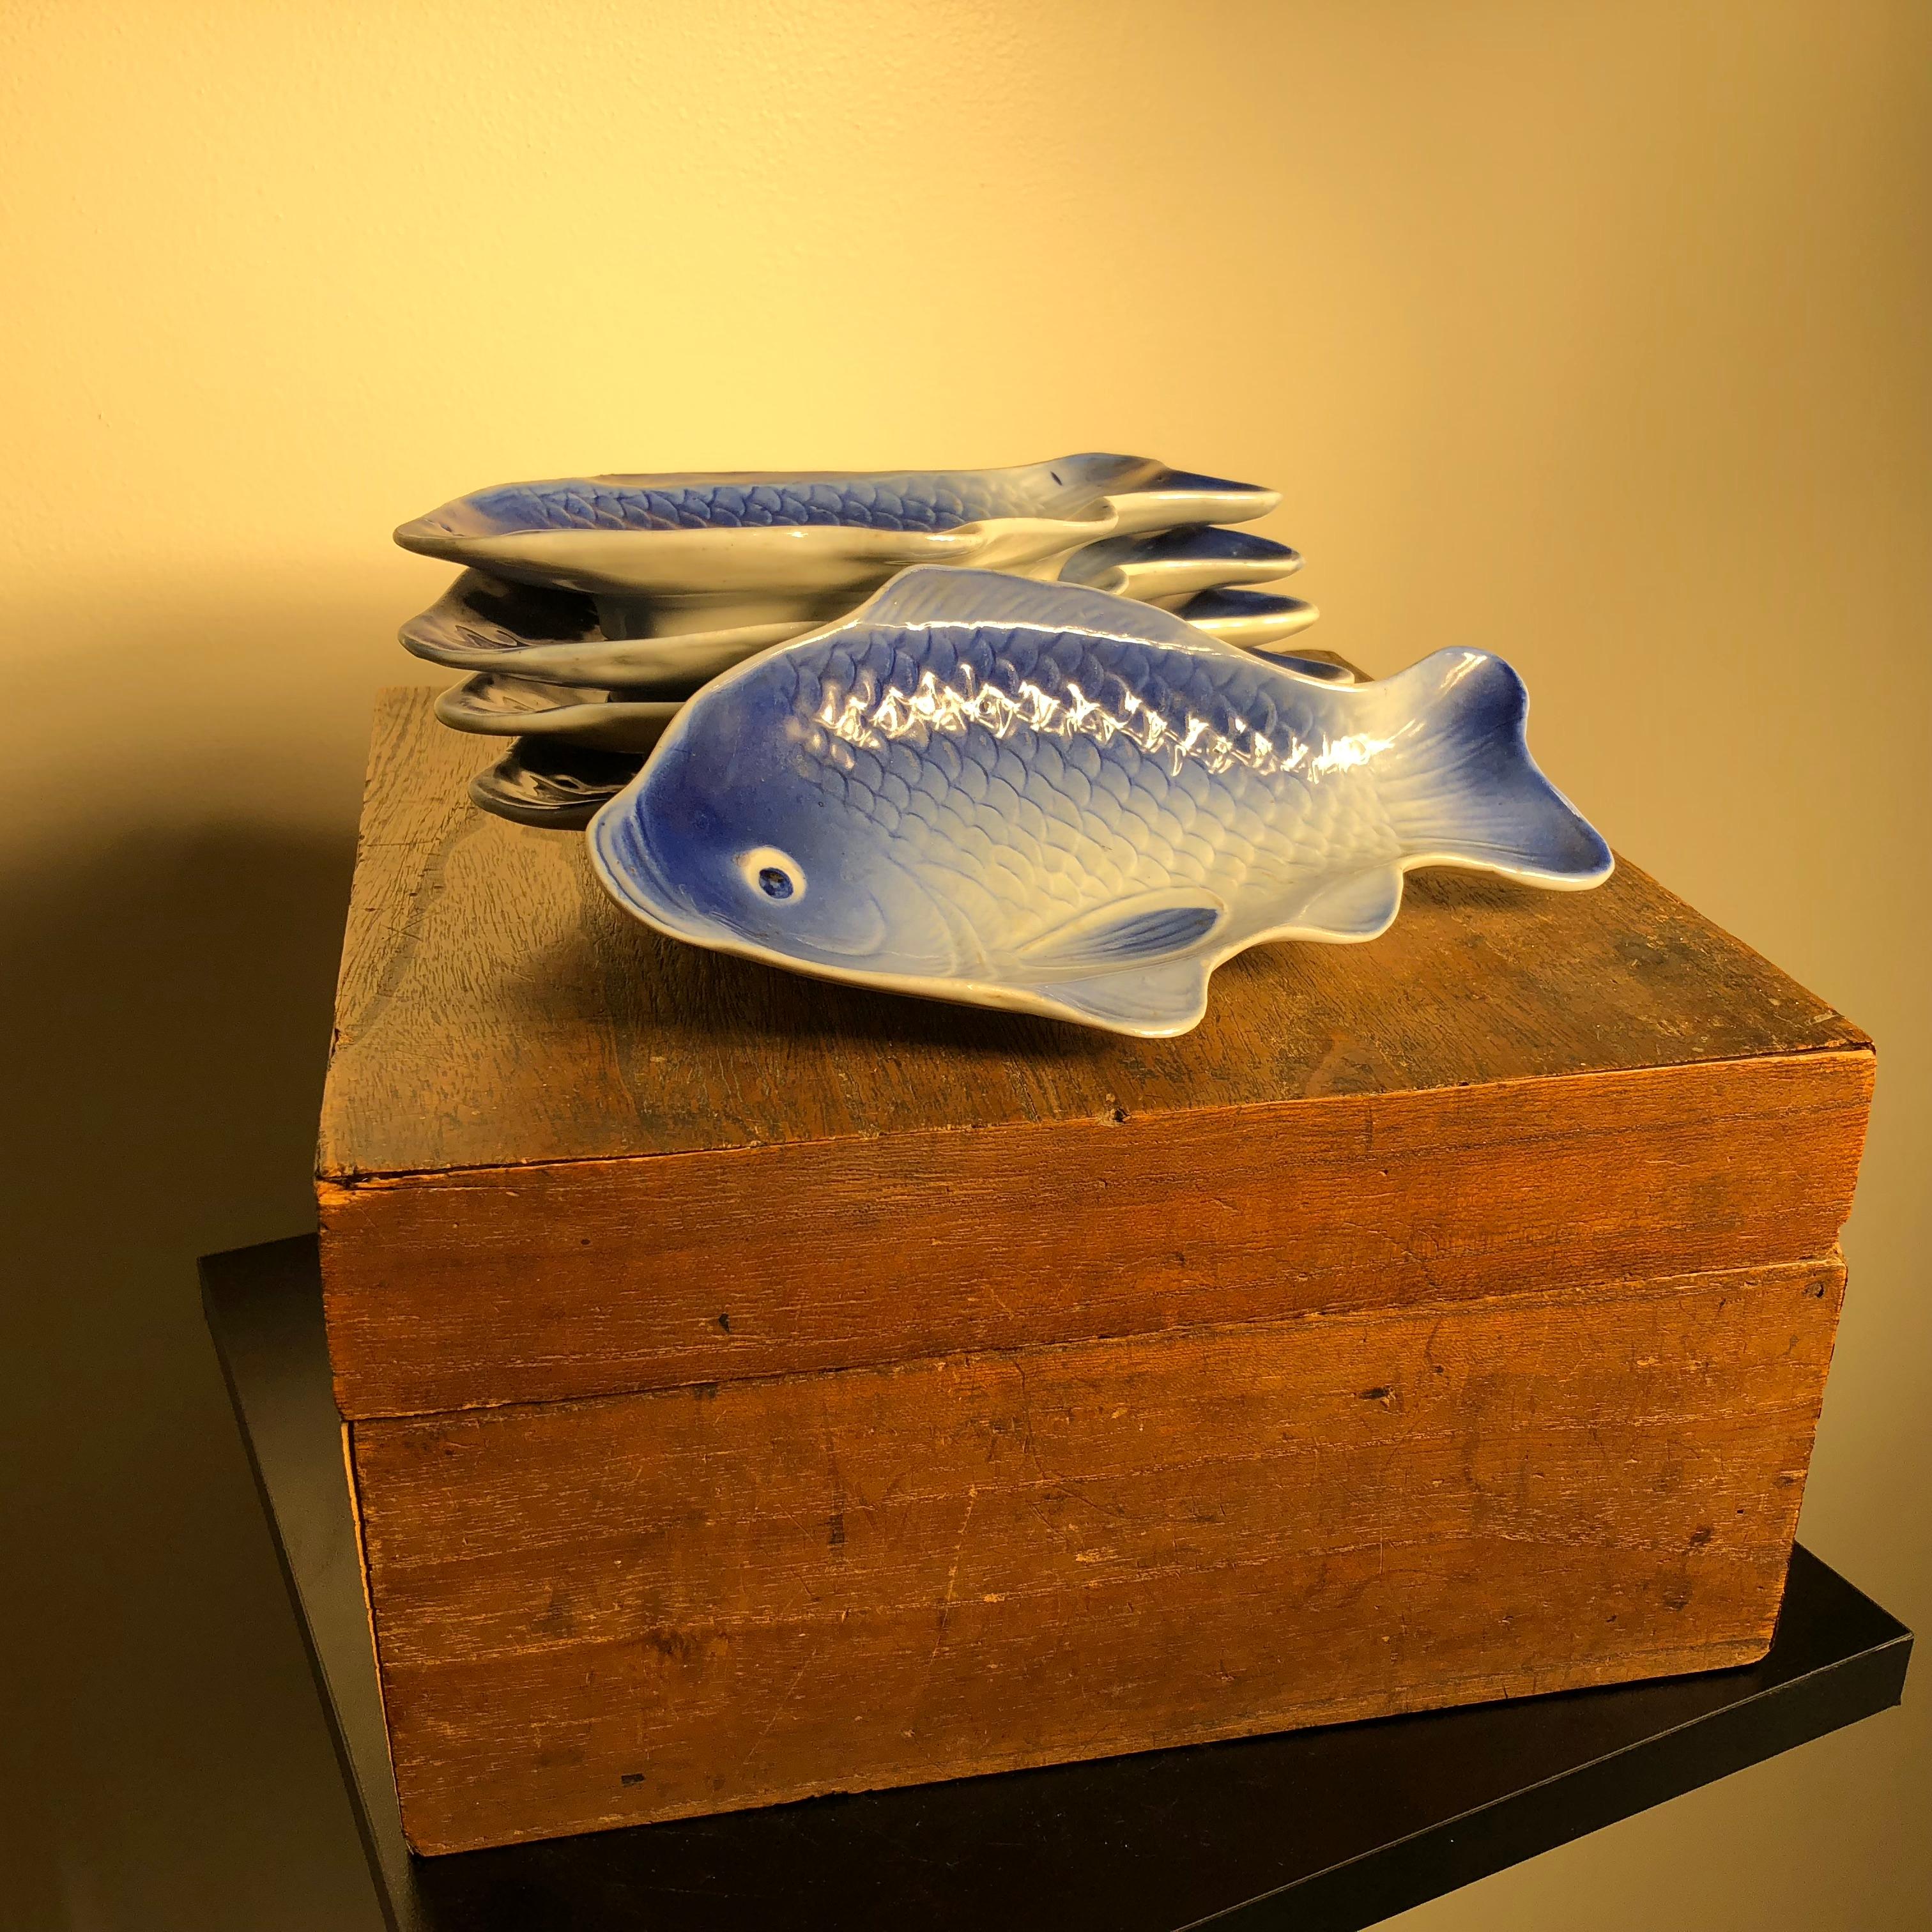 Ceramic Japanese Antique Blue and White Fish Serving Plates with Fine Details